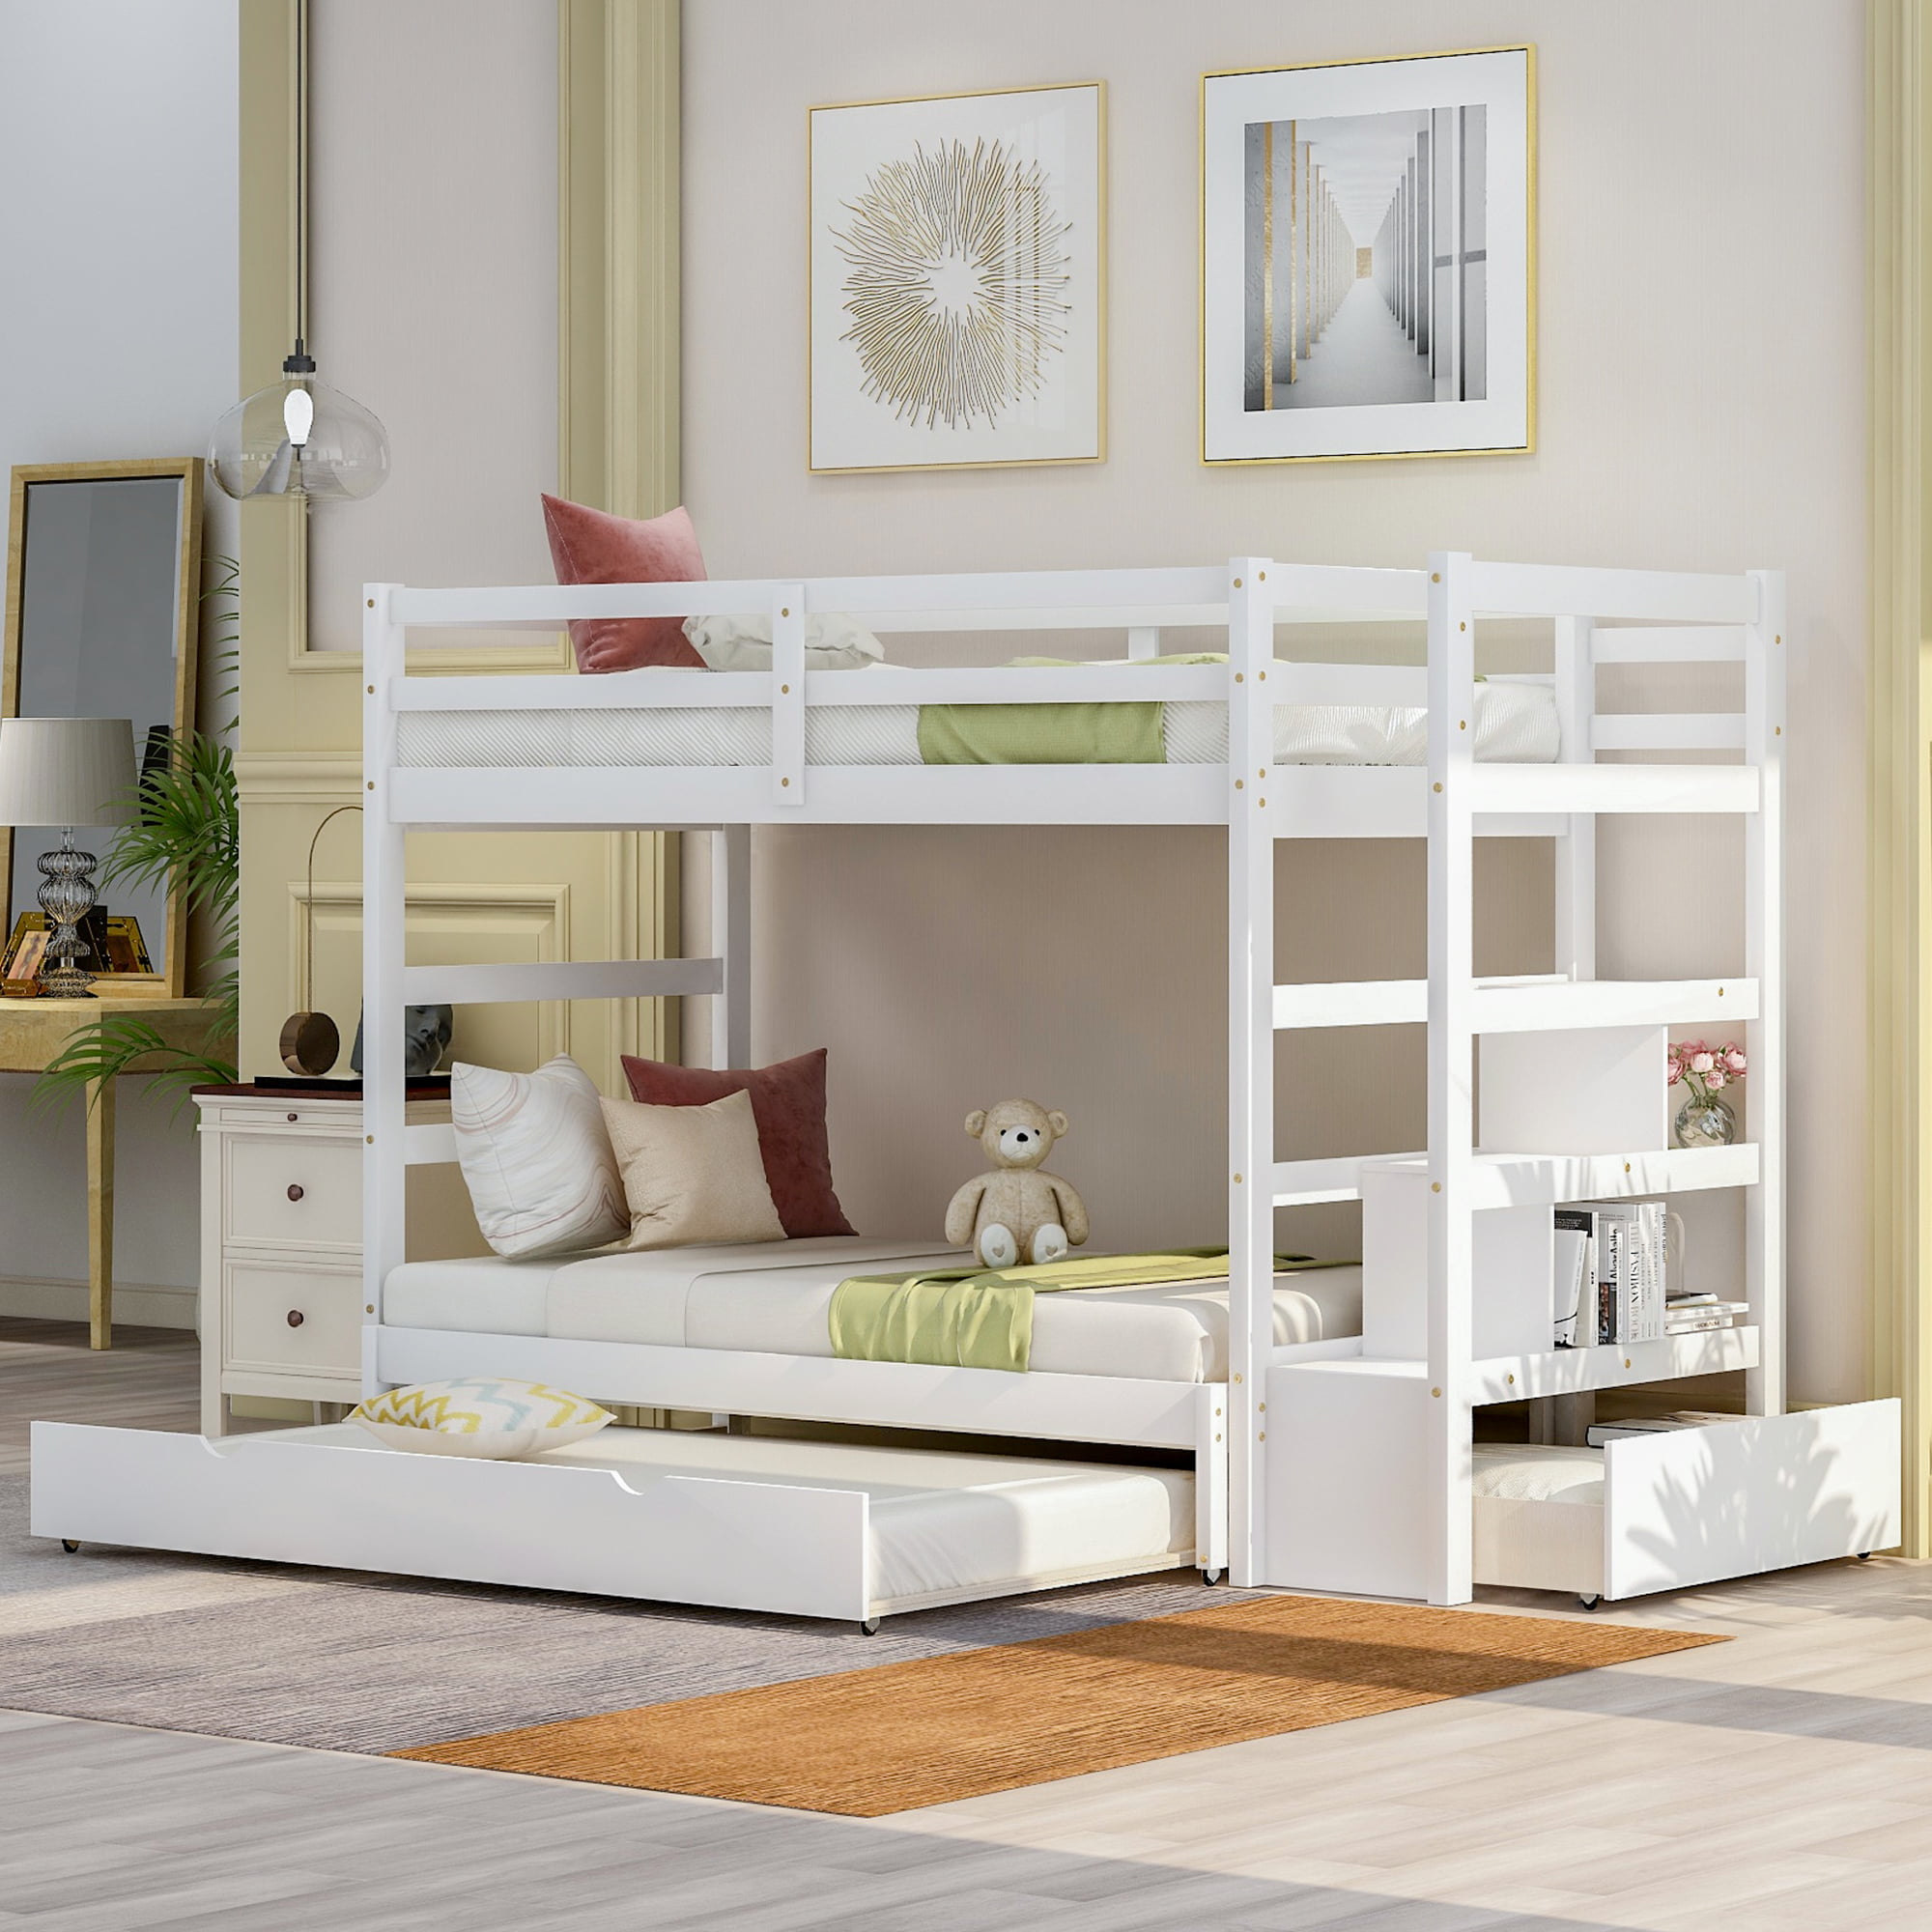 Kid's Bunk Bed with Trundle, Twin-Over-Twin Bunk Bed for Kids, Space